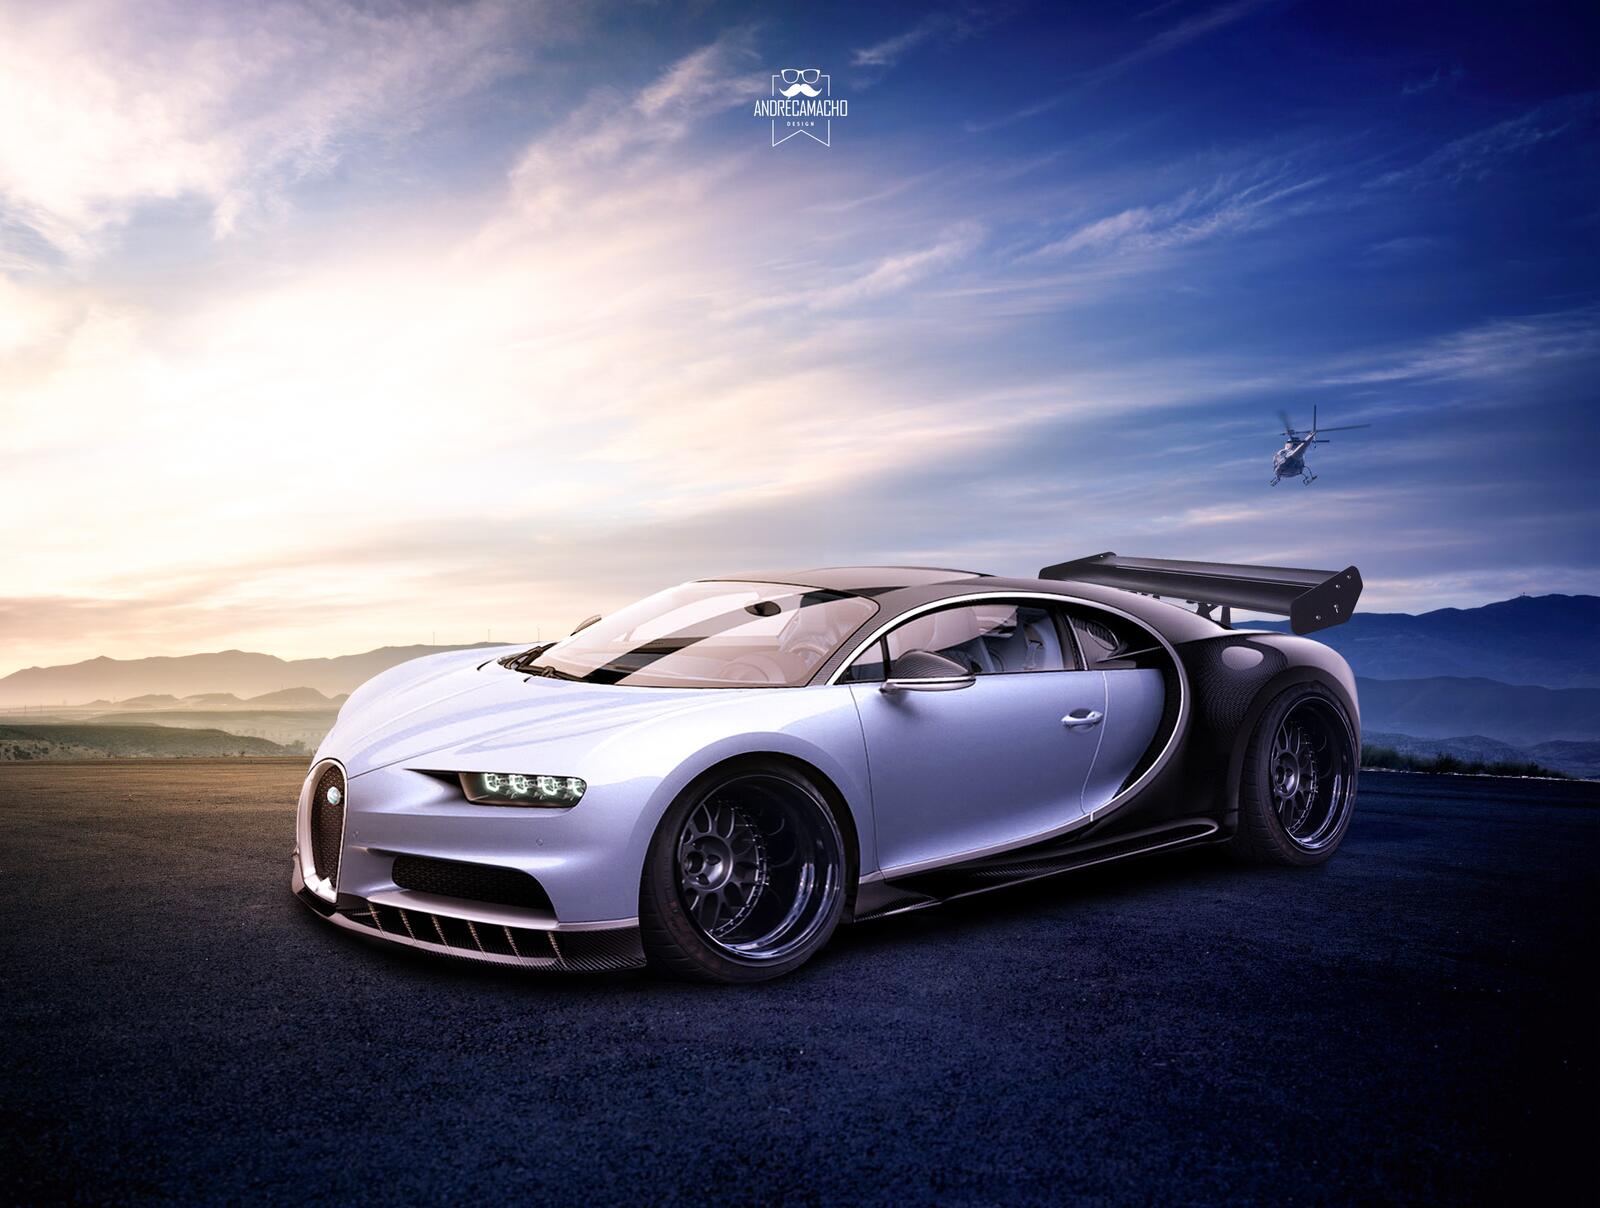 Wallpapers Bugatti Veyron cars Concept Cars on the desktop